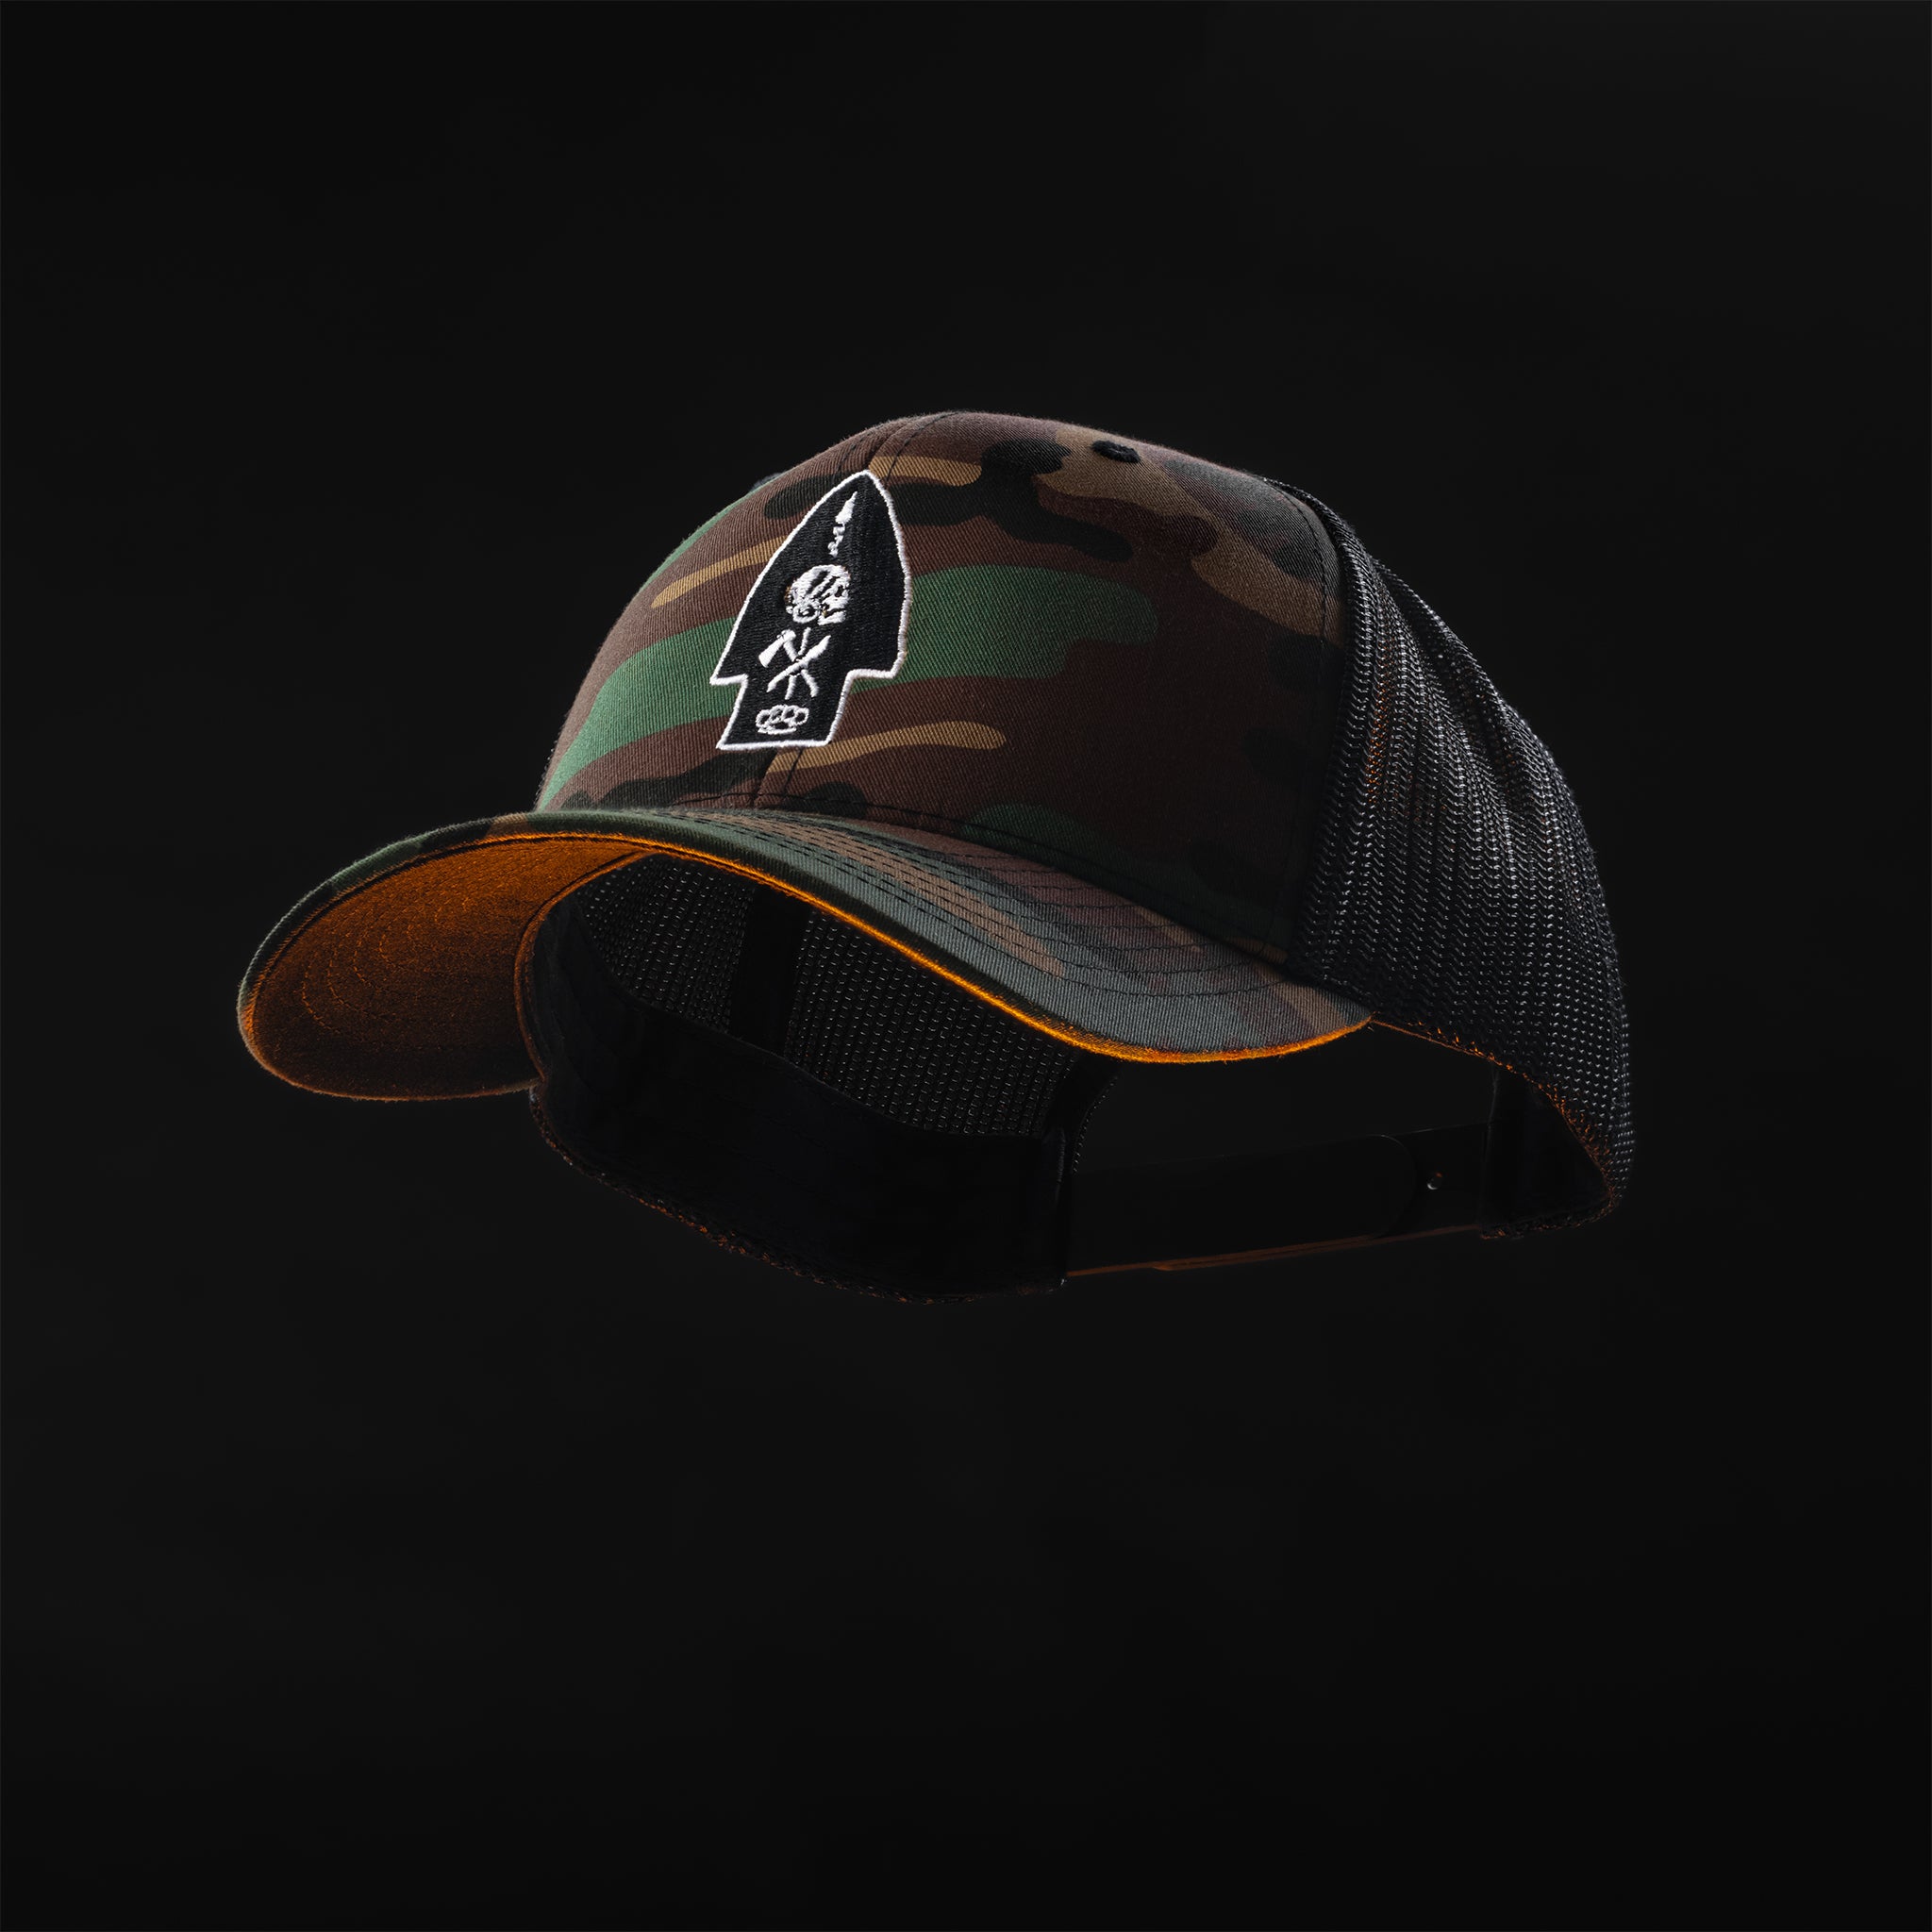 The M81A3 Snapback Hat